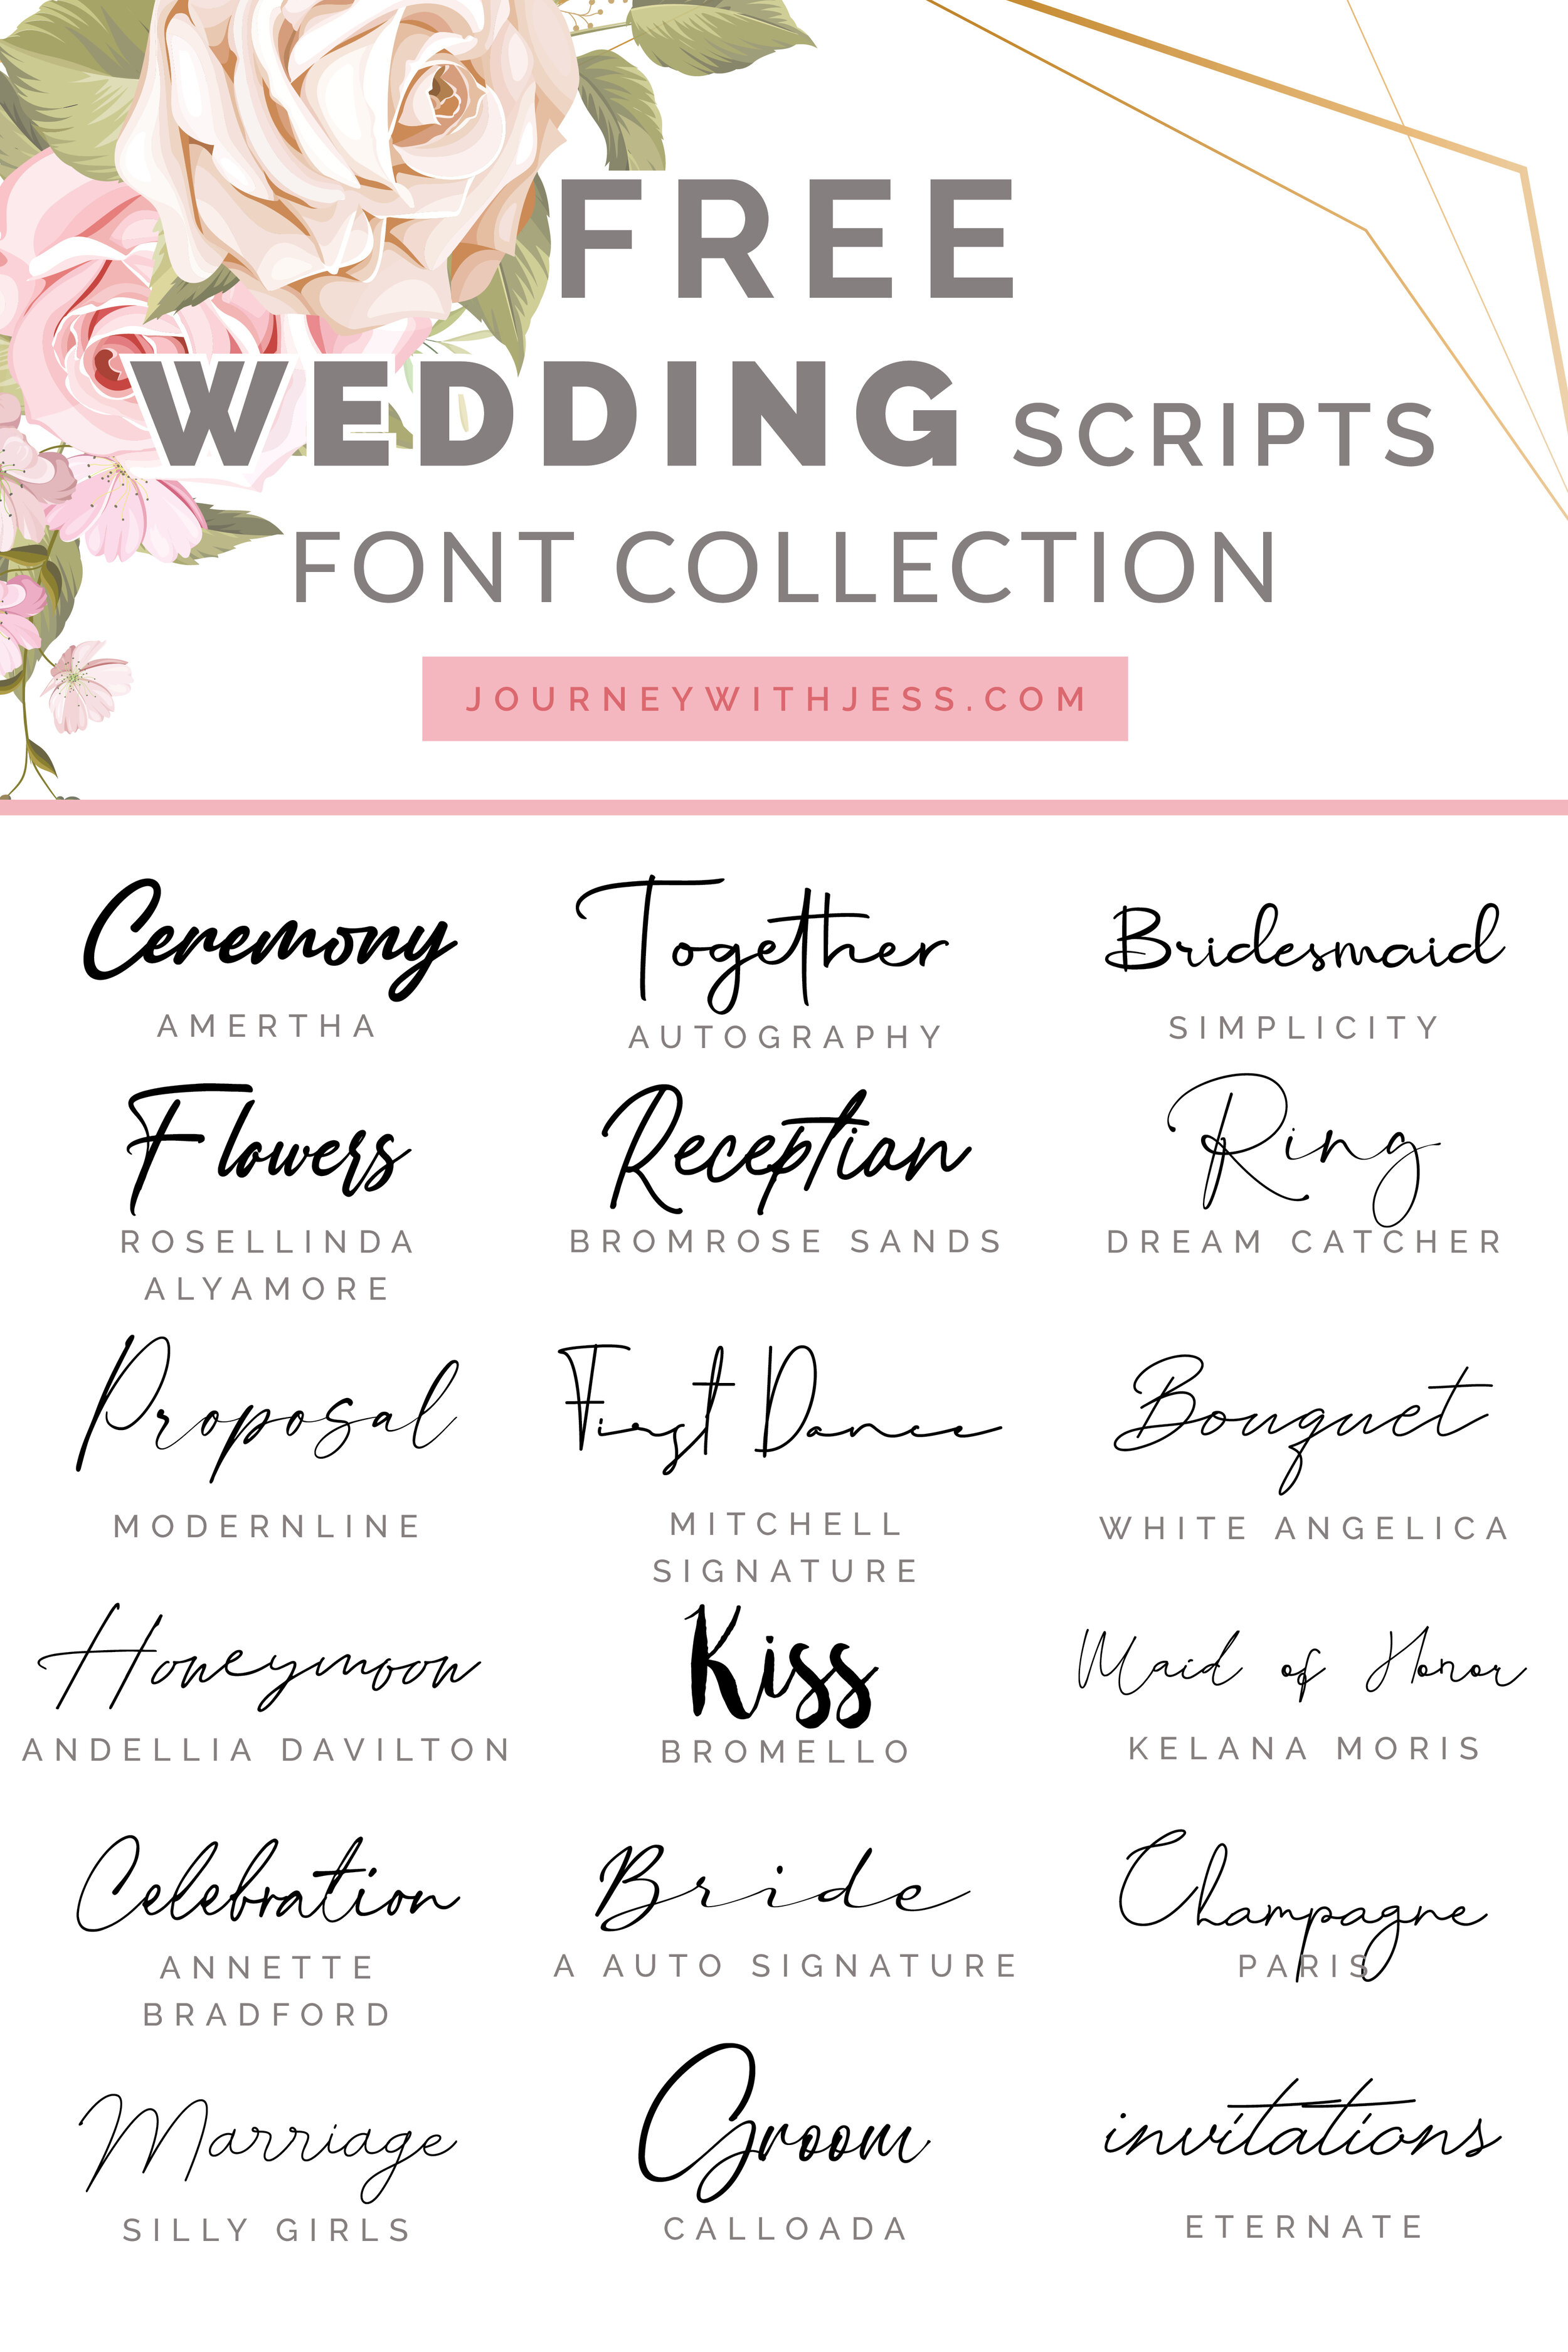 Free Font Collection Wedding Scripts — Journey With Jess Inspiration